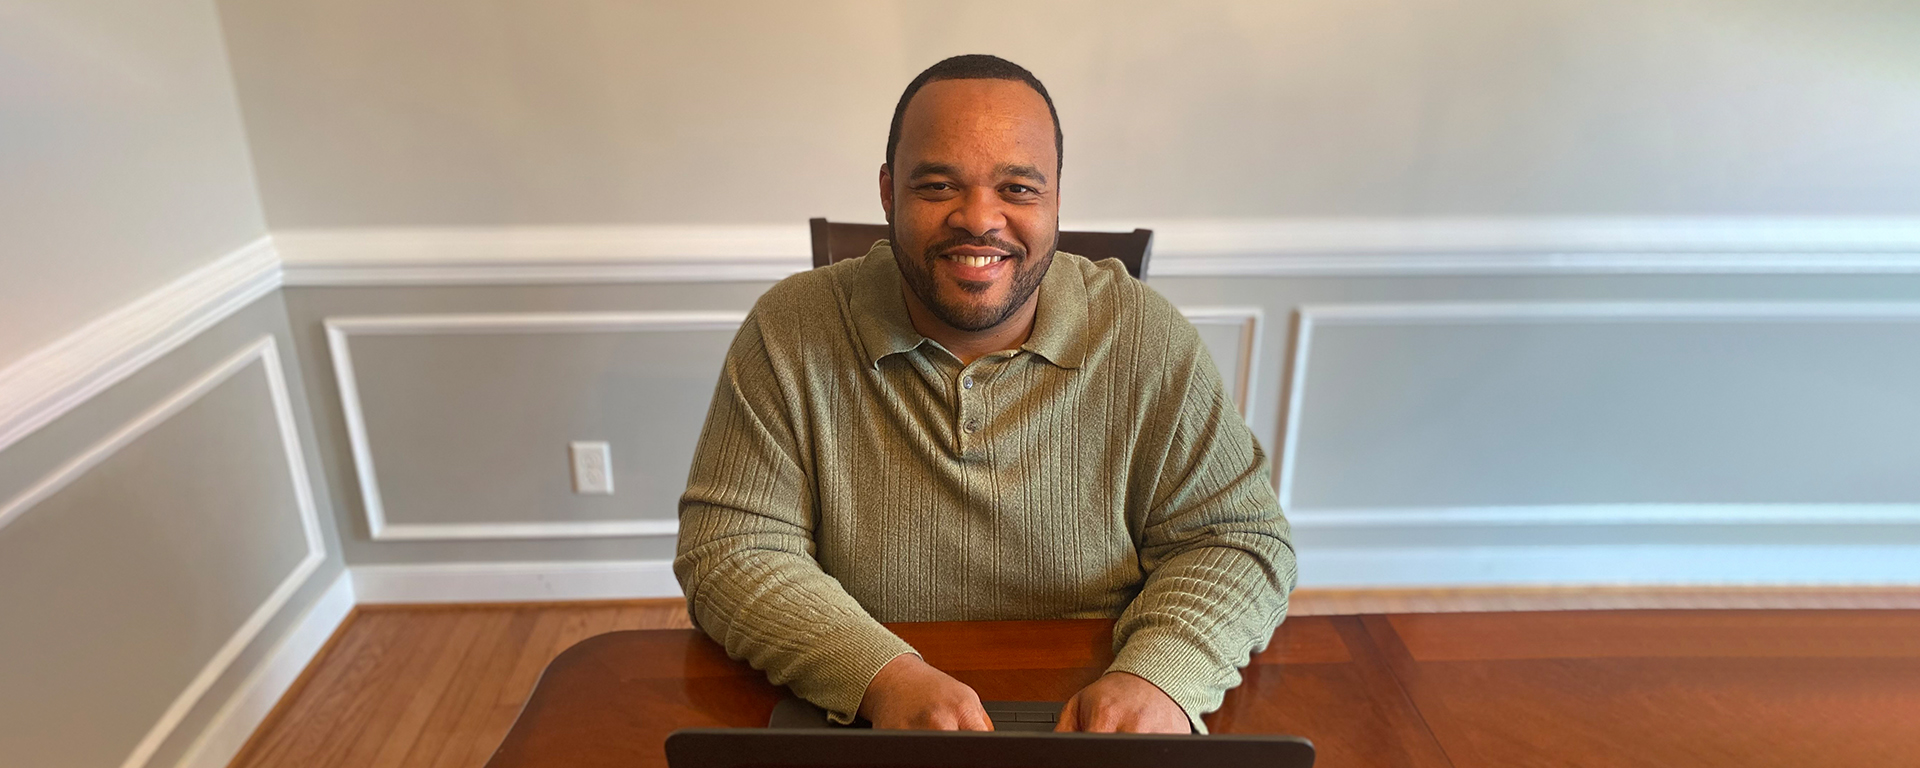 Tyrell, a Capital One associate, sits at his desk working from home and talks about Capital One having his dream job